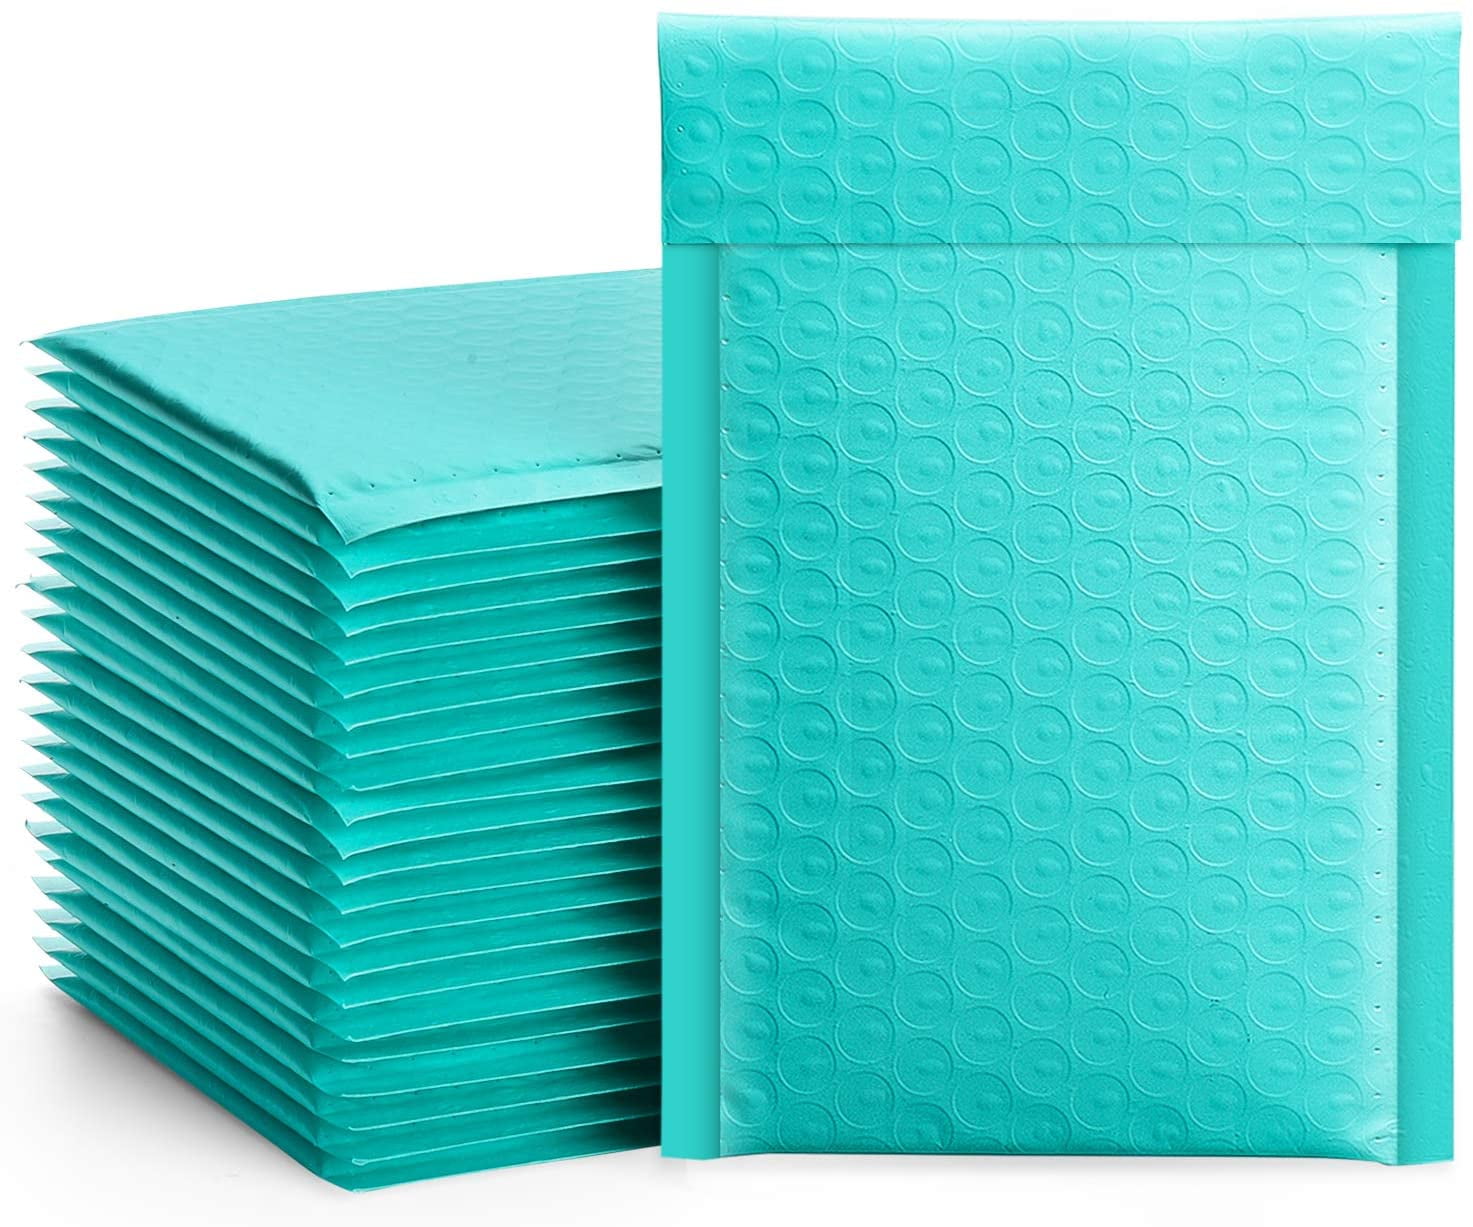 Metronic 50pcs Poly Bubble Mailers 4x8 Bubble Mailers Teal Inch Padded Envelopes #000 Bubble Lined Poly Mailer Self Seal 